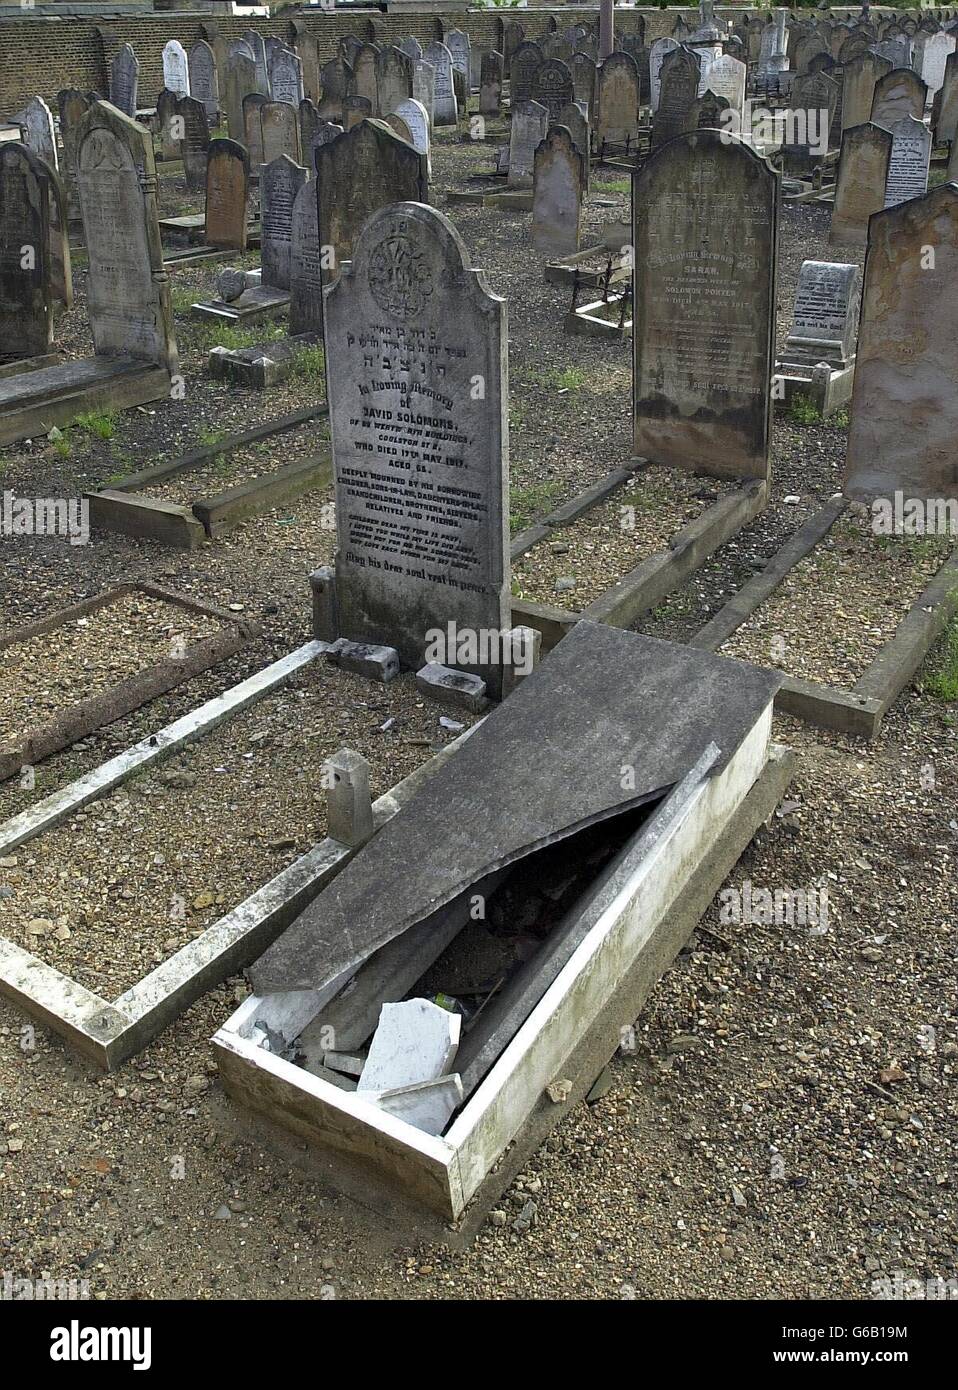 One of more than 380 graves desecrated in a Jewish cemetery in what police, termed as a racially motivated attack. Officers were called to Plashet Cemetery in East Ham, London. They discovered 386 graves which appeared to have been pushed over and damaged. * A police spokesman said: There was no evidence of any disturbance to the graves themselves and there was no evidence of any graffiti daubed. Stock Photo